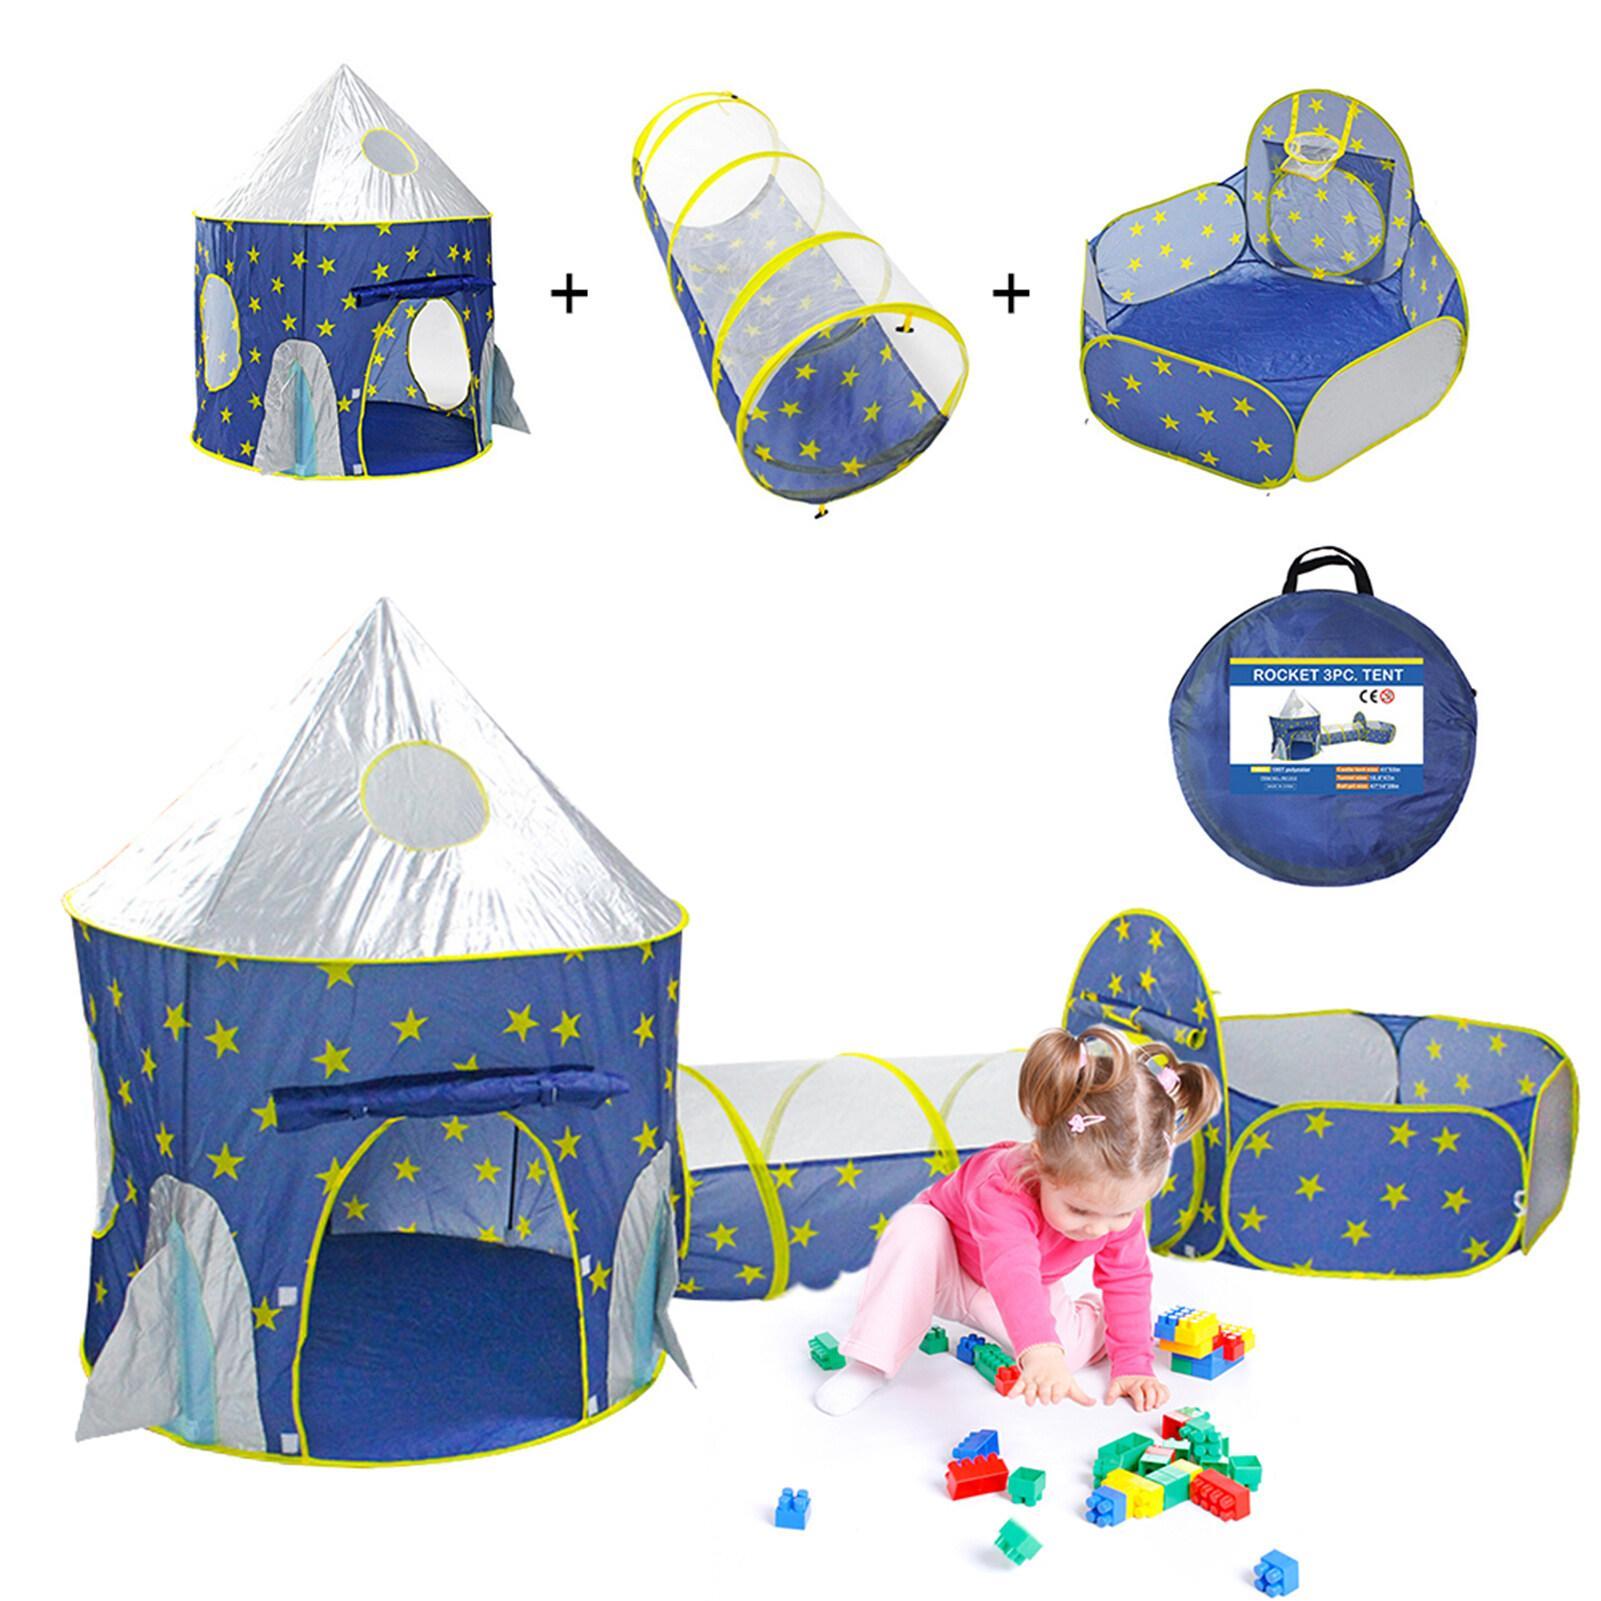 3 in 1 Kids Playhouse Children Play Tent with Tunnel Ball Pit for Toddlers Boys Indoor Outdoor Play House